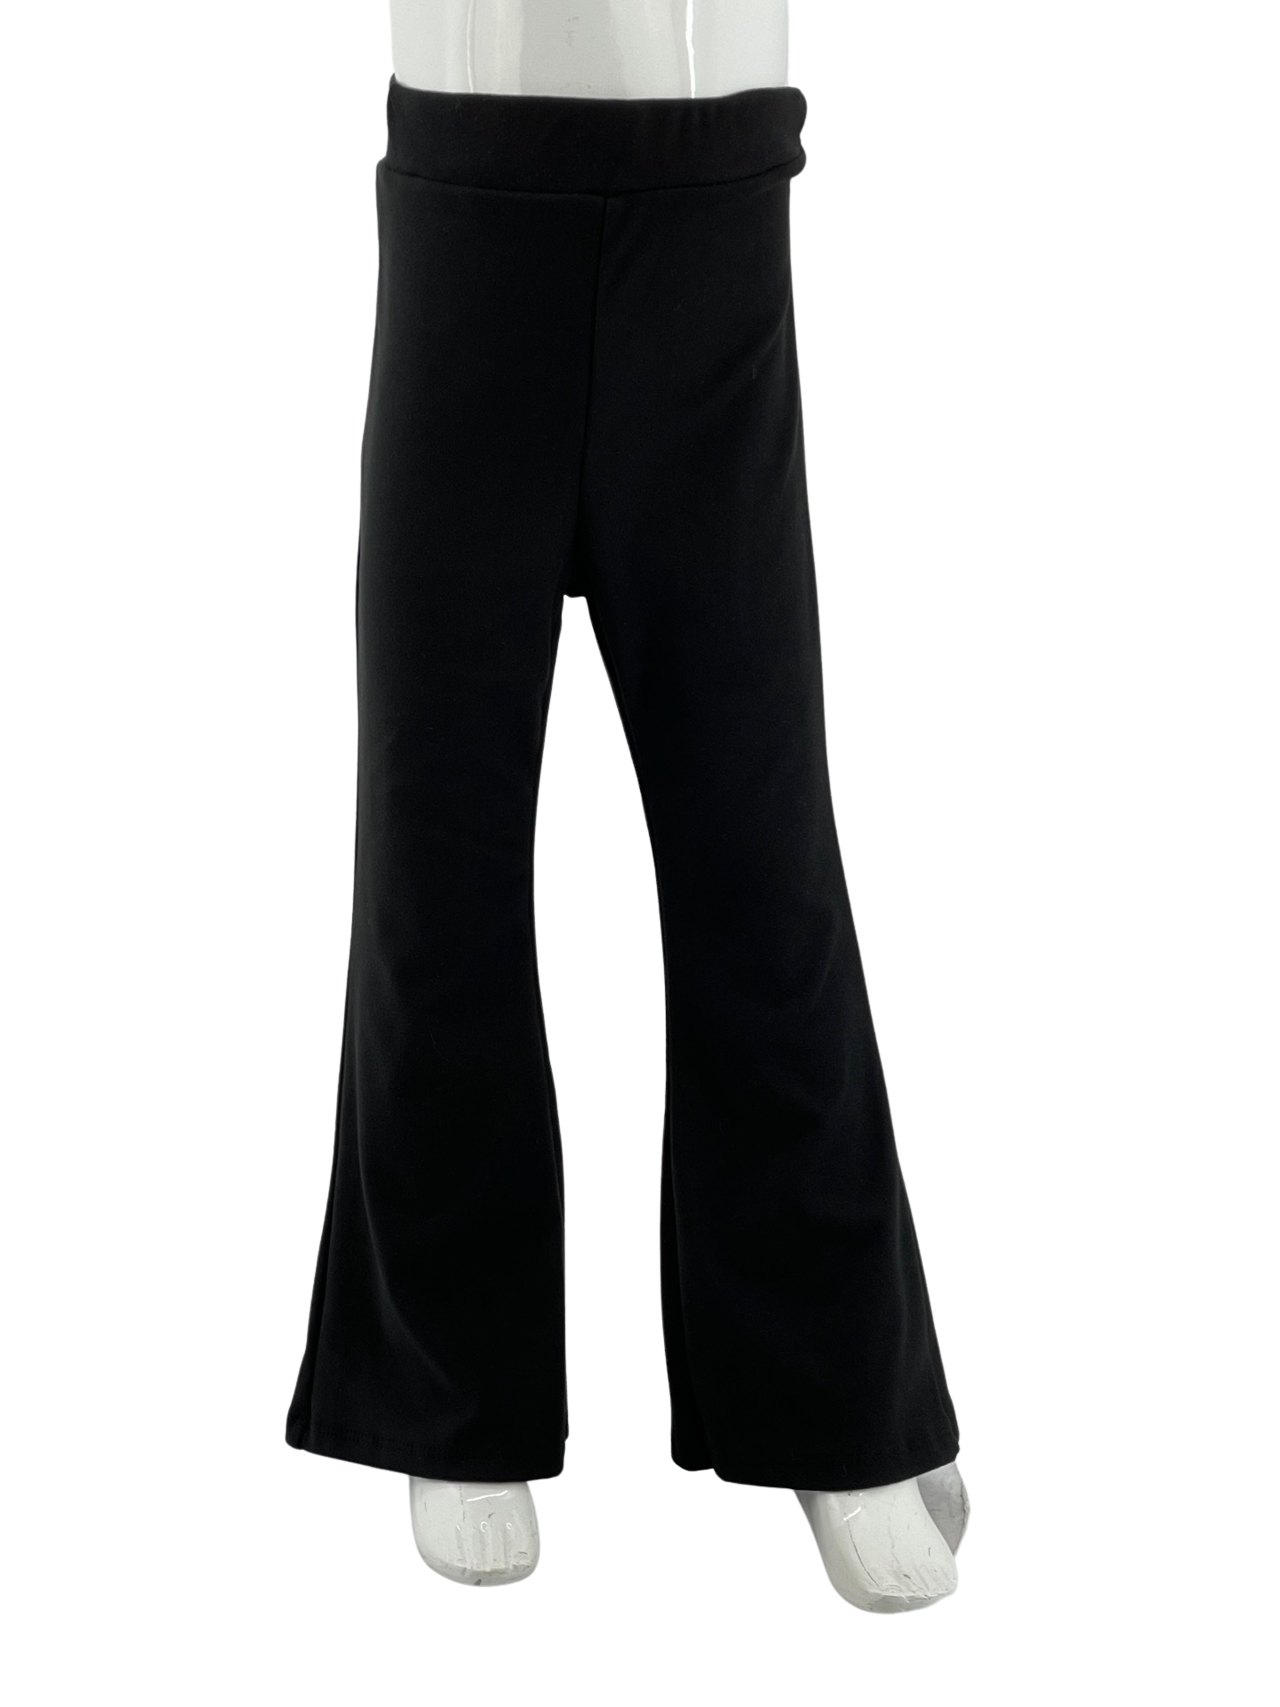 Girl pants with bell code 3449